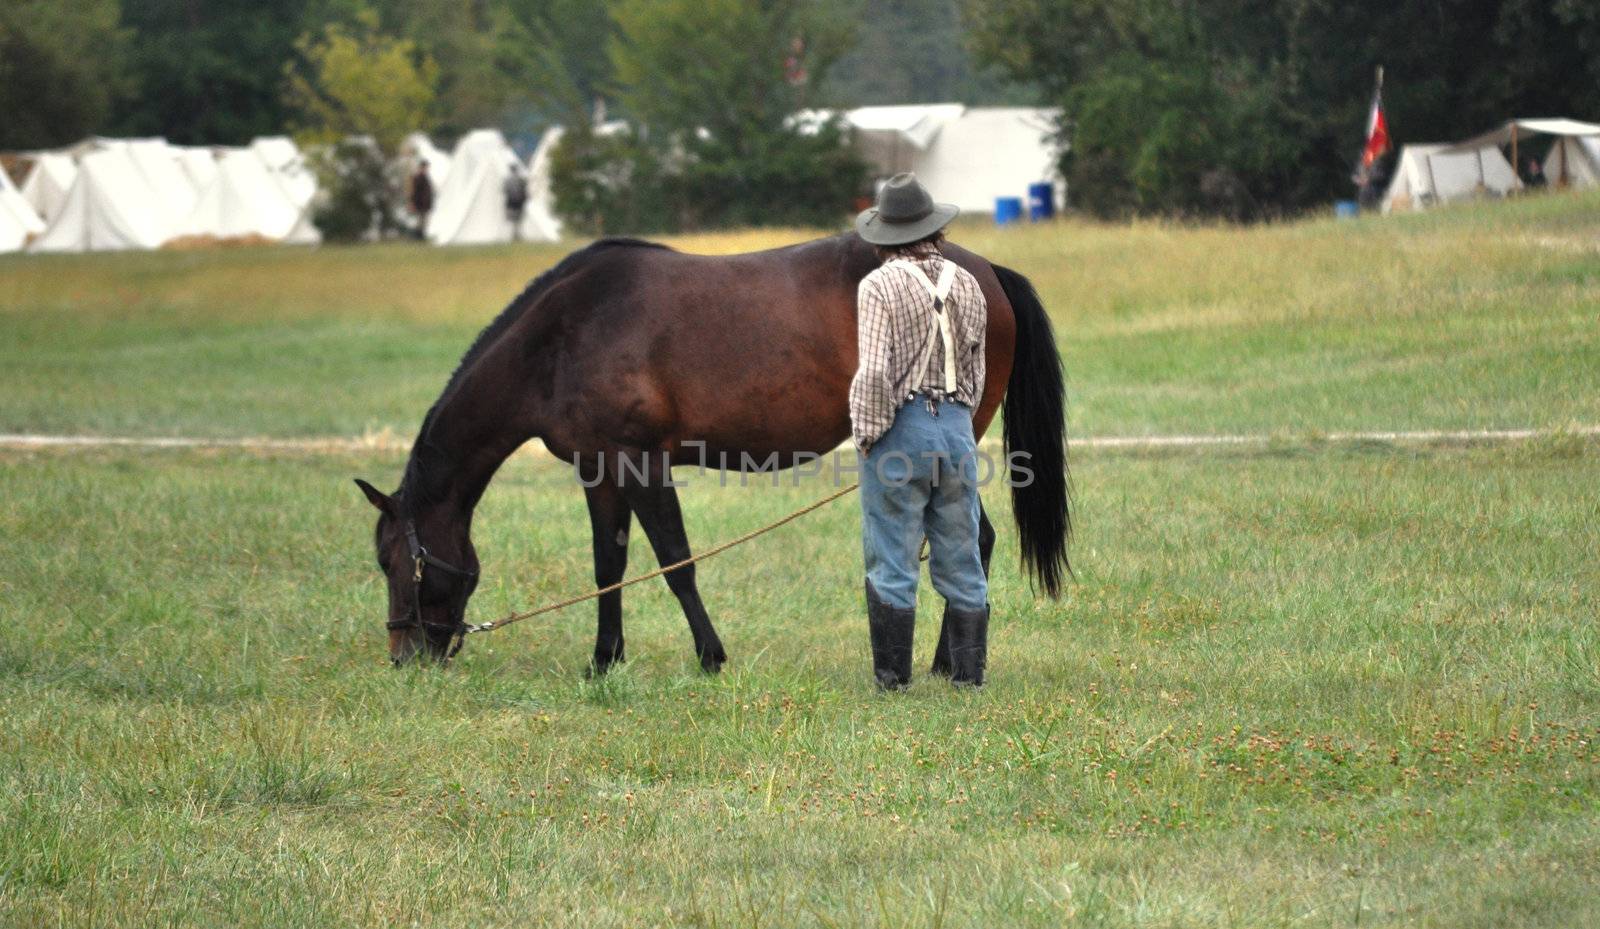 Civil War Re-enactment - man and horse by RefocusPhoto